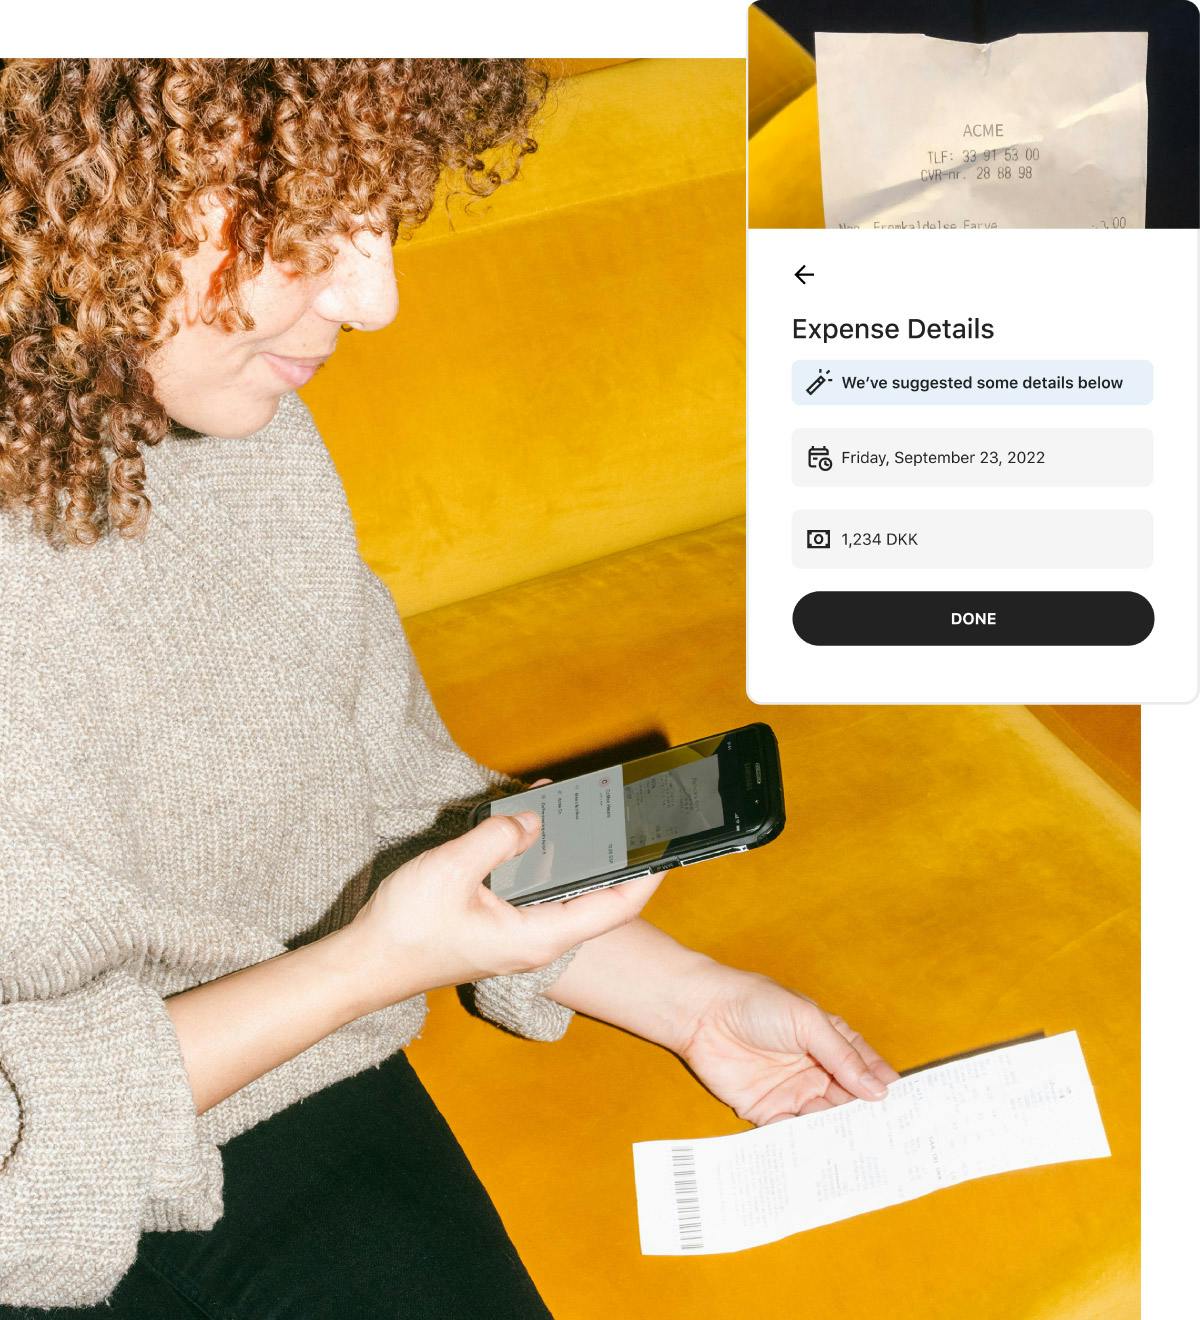 Picture of a person scanning an expense receipt with Pleo app